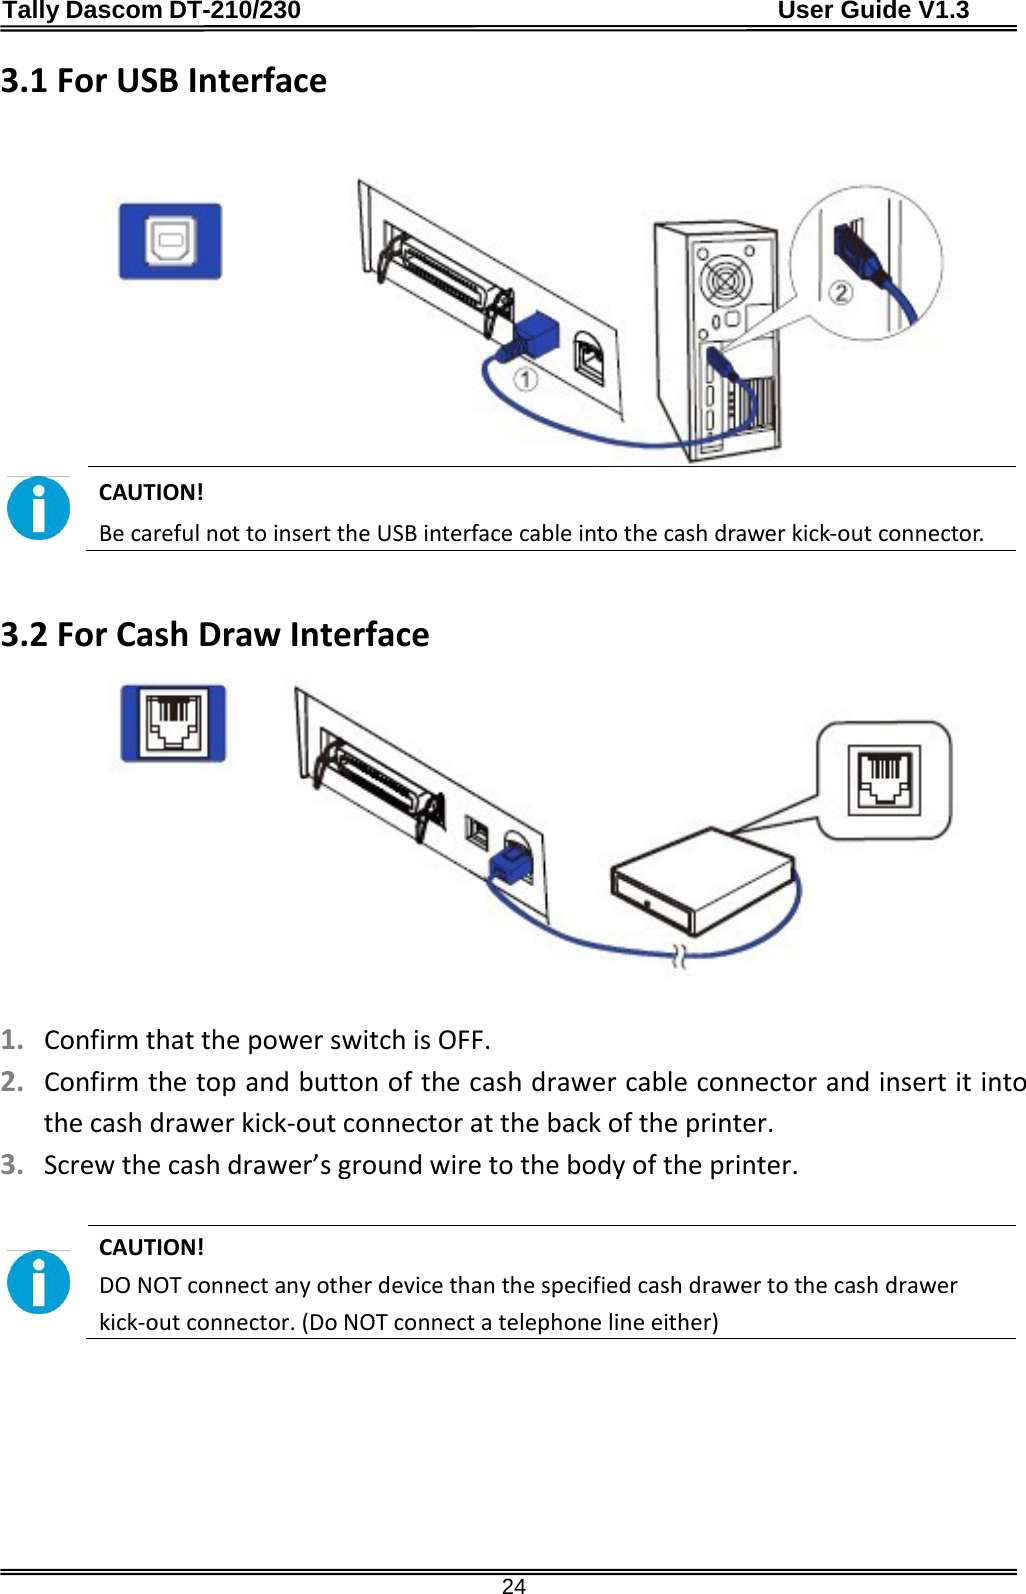 Tally Dascom DT-210/230                                      User Guide V1.3  24 3.1 For USB Interface    CAUTION!   Be careful not to insert the USB interface cable into the cash drawer kick-out connector.   3.2 For Cash Draw Interface    1. Confirm that the power switch is OFF. 2. Confirm the top and button of the cash drawer cable connector and insert it into the cash drawer kick-out connector at the back of the printer. 3. Screw the cash drawer’s ground wire to the body of the printer.   CAUTION!   DO NOT connect any other device than the specified cash drawer to the cash drawer kick-out connector. (Do NOT connect a telephone line either)  